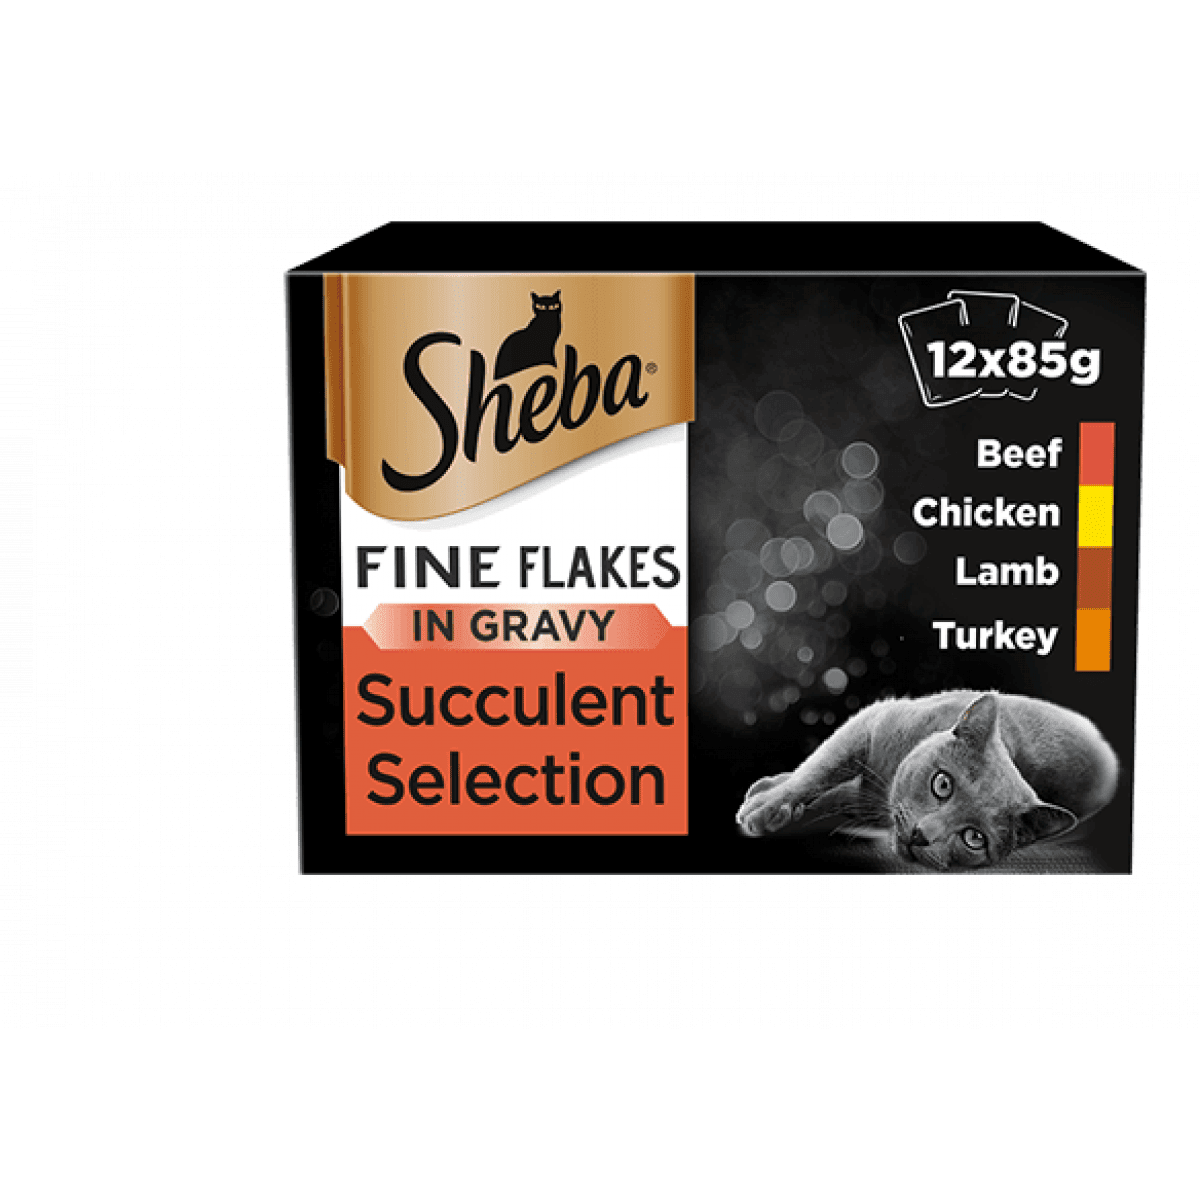 Sheba FF Succulent Selection in Gravy 12 x 85g Product Image